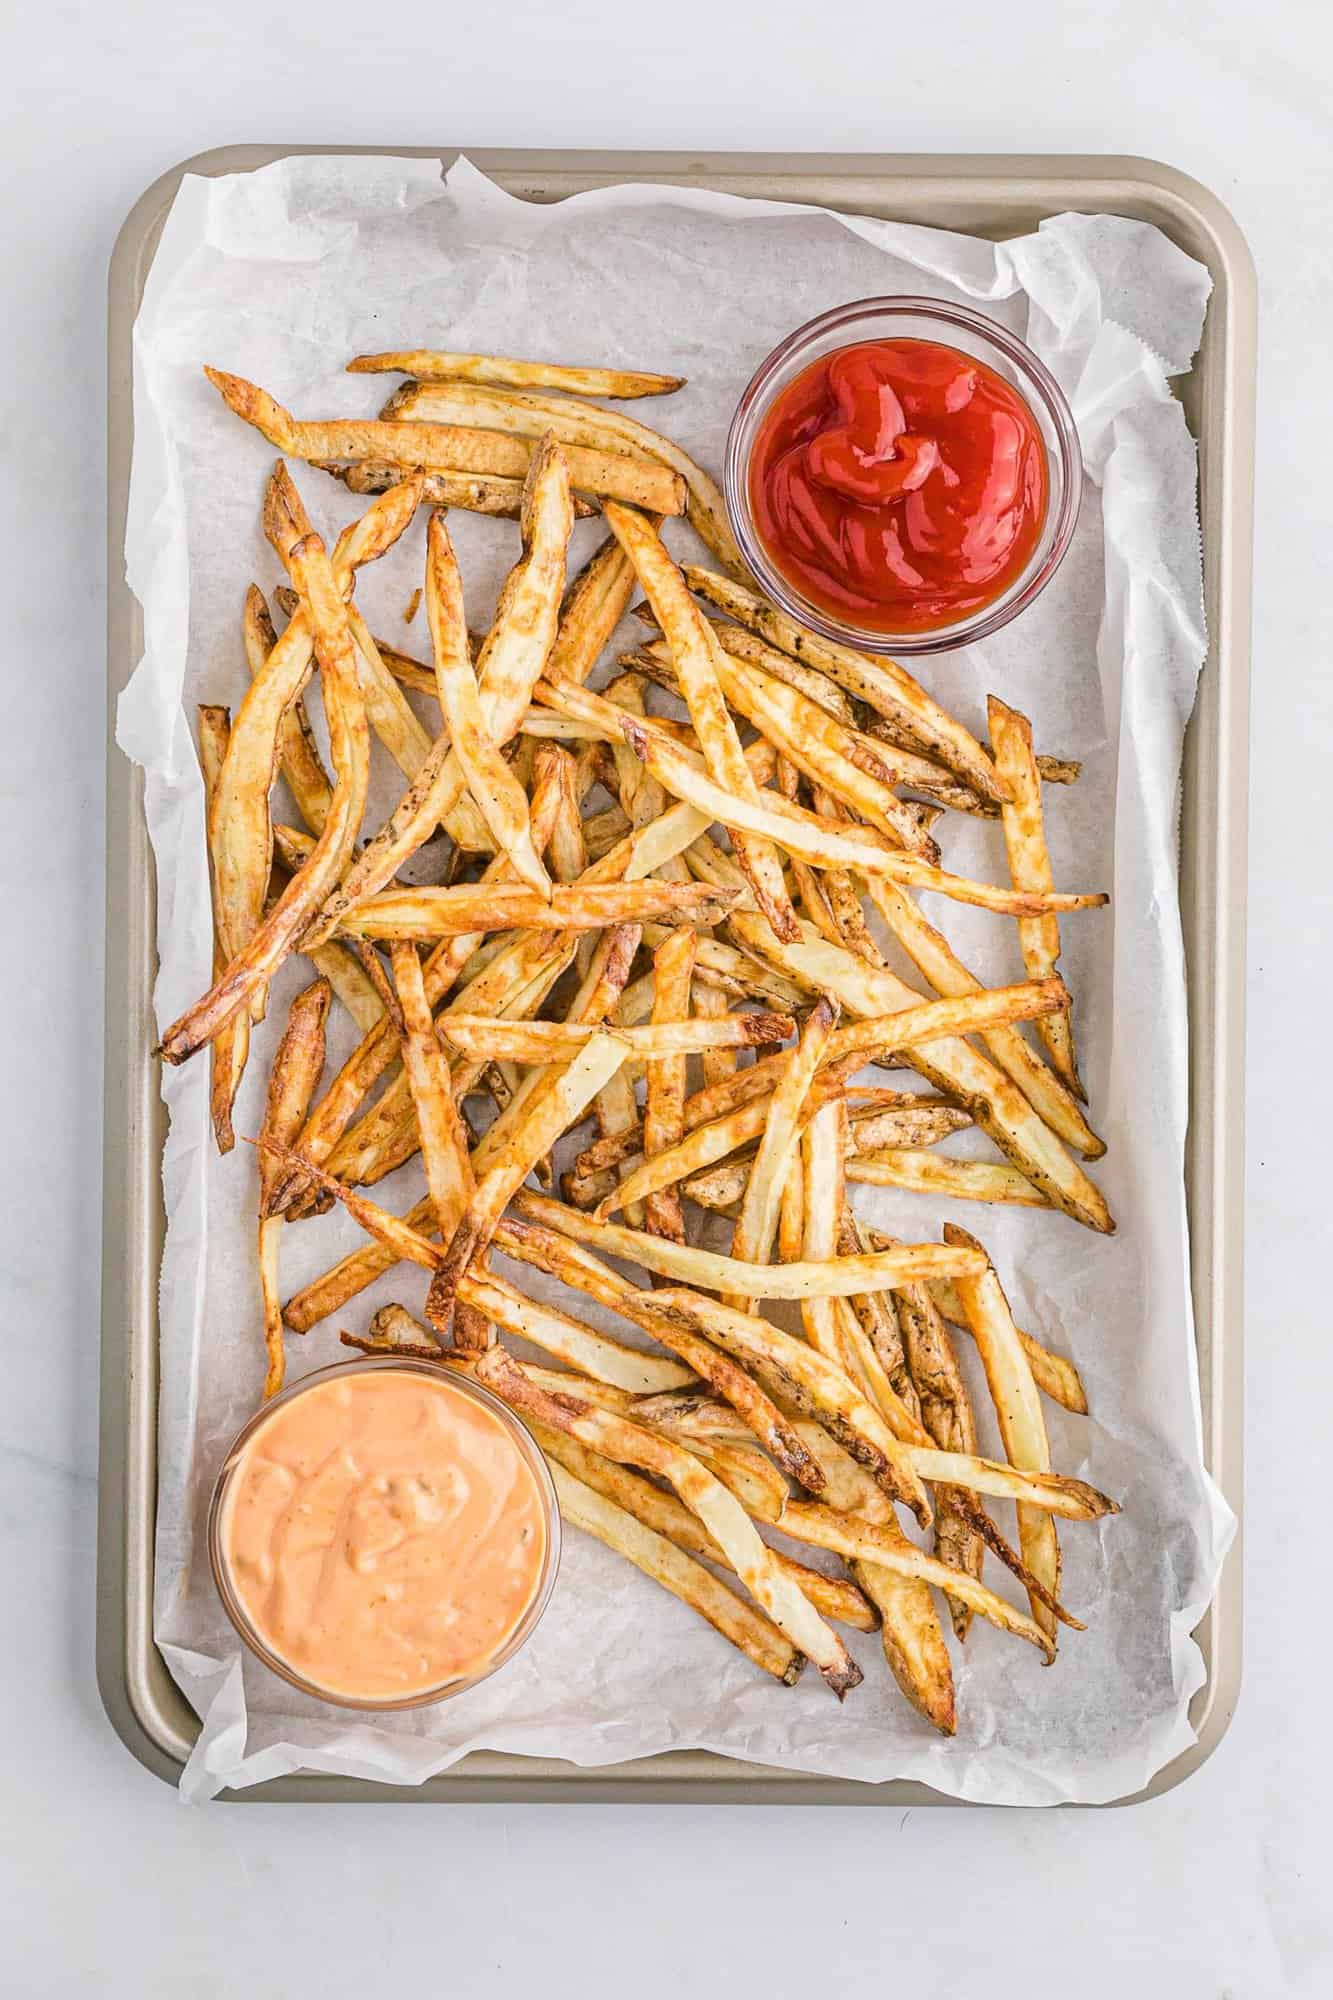 Overhead view of air fryer french fries with two dipping sauces.